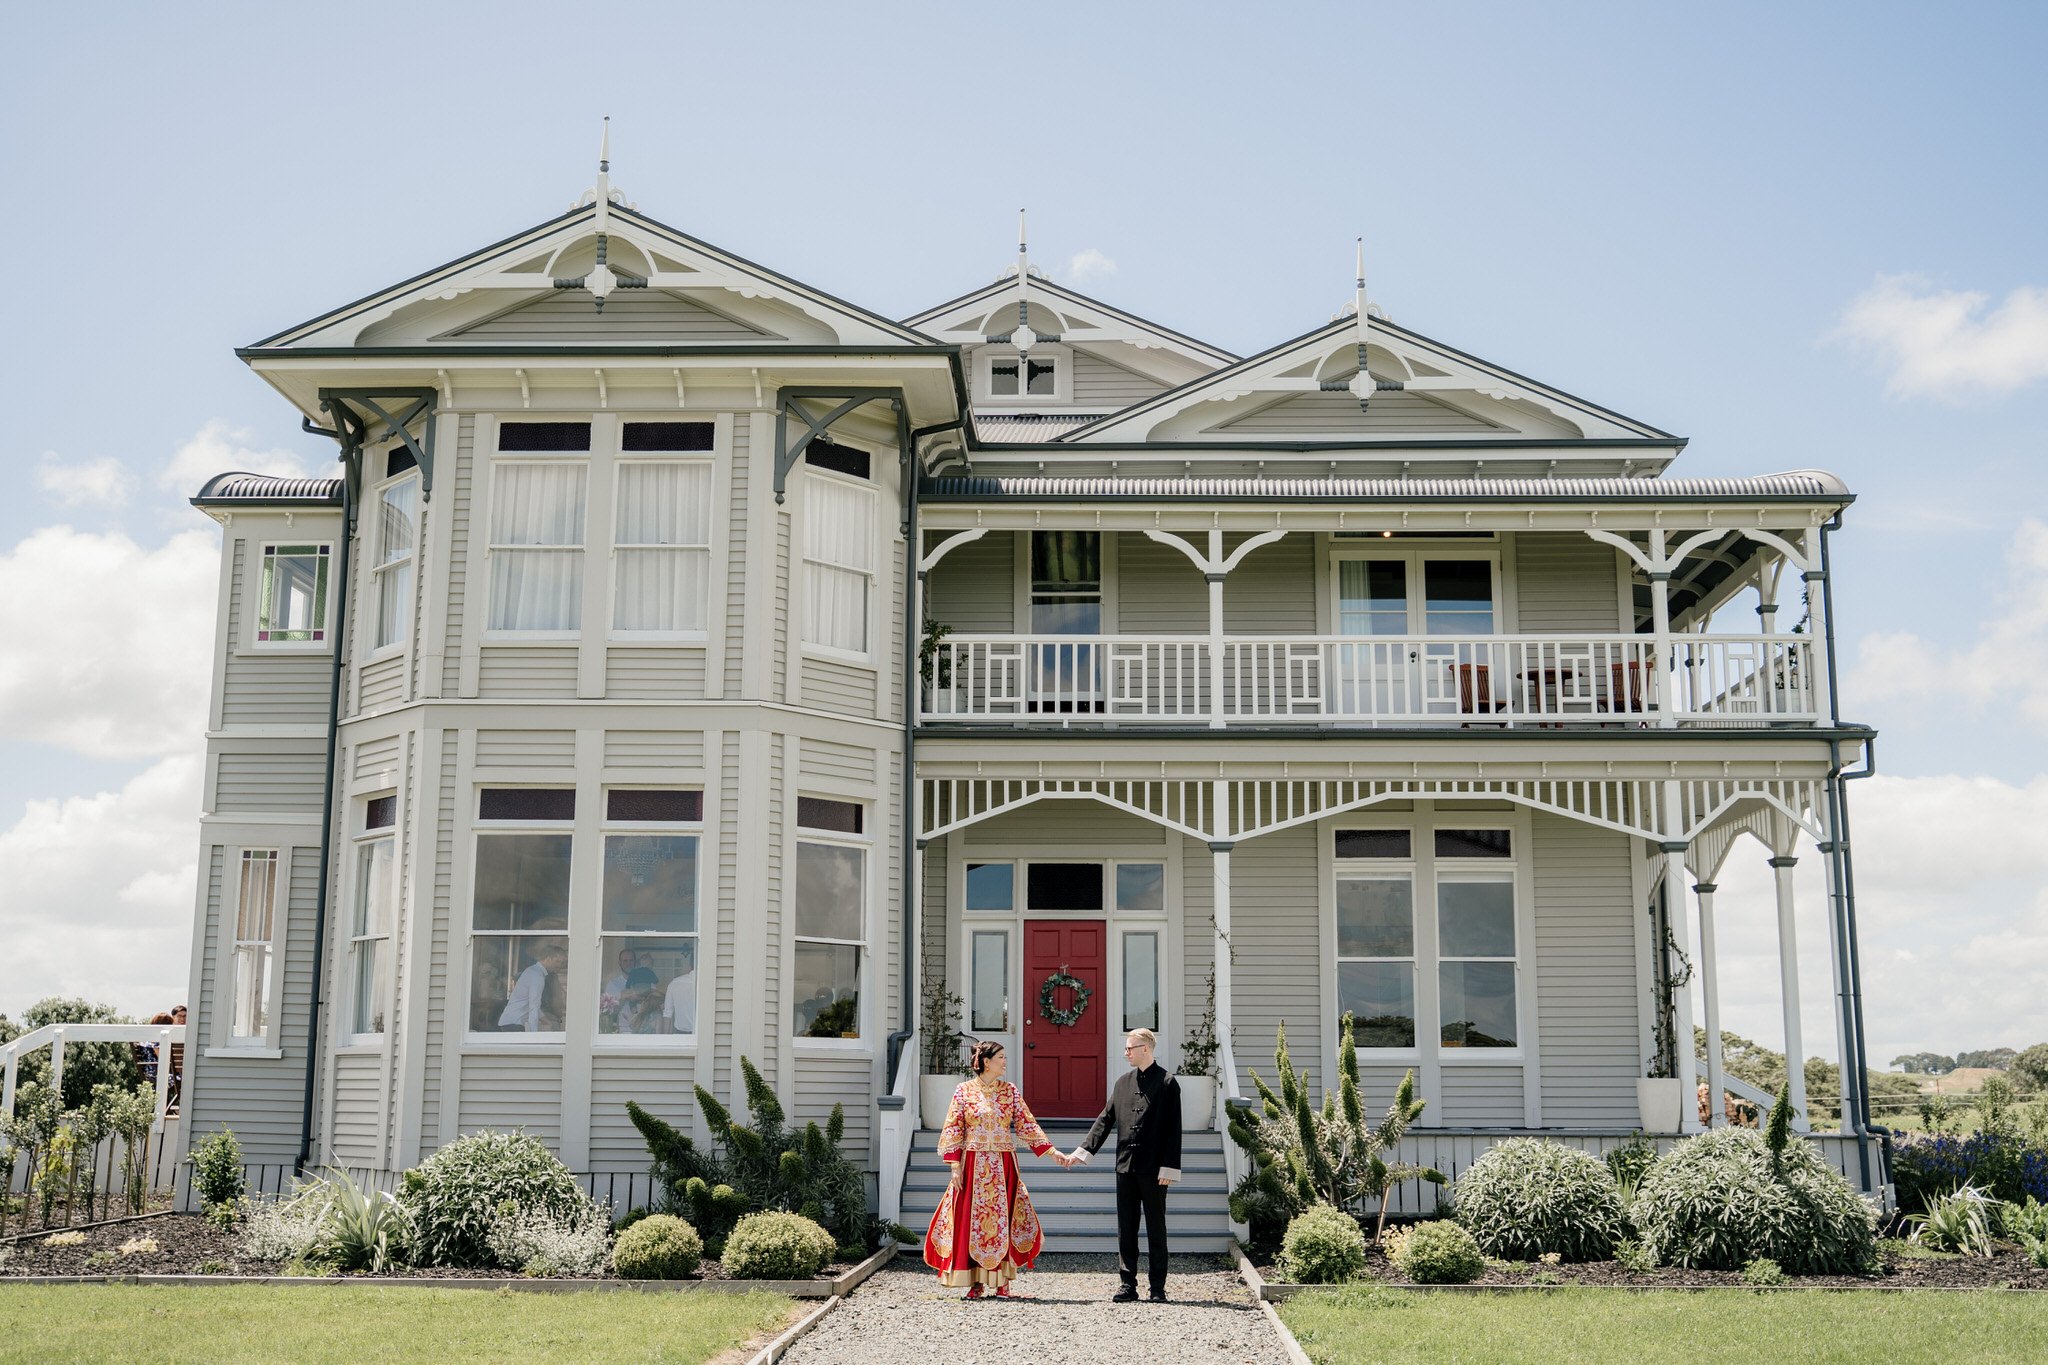 huntly-house-auckland-wedding-venue-mansion-vintage-luxury-accommodation-photographer-videography-dear-white-productions-photo-film-south-clarks-beach (32).jpg